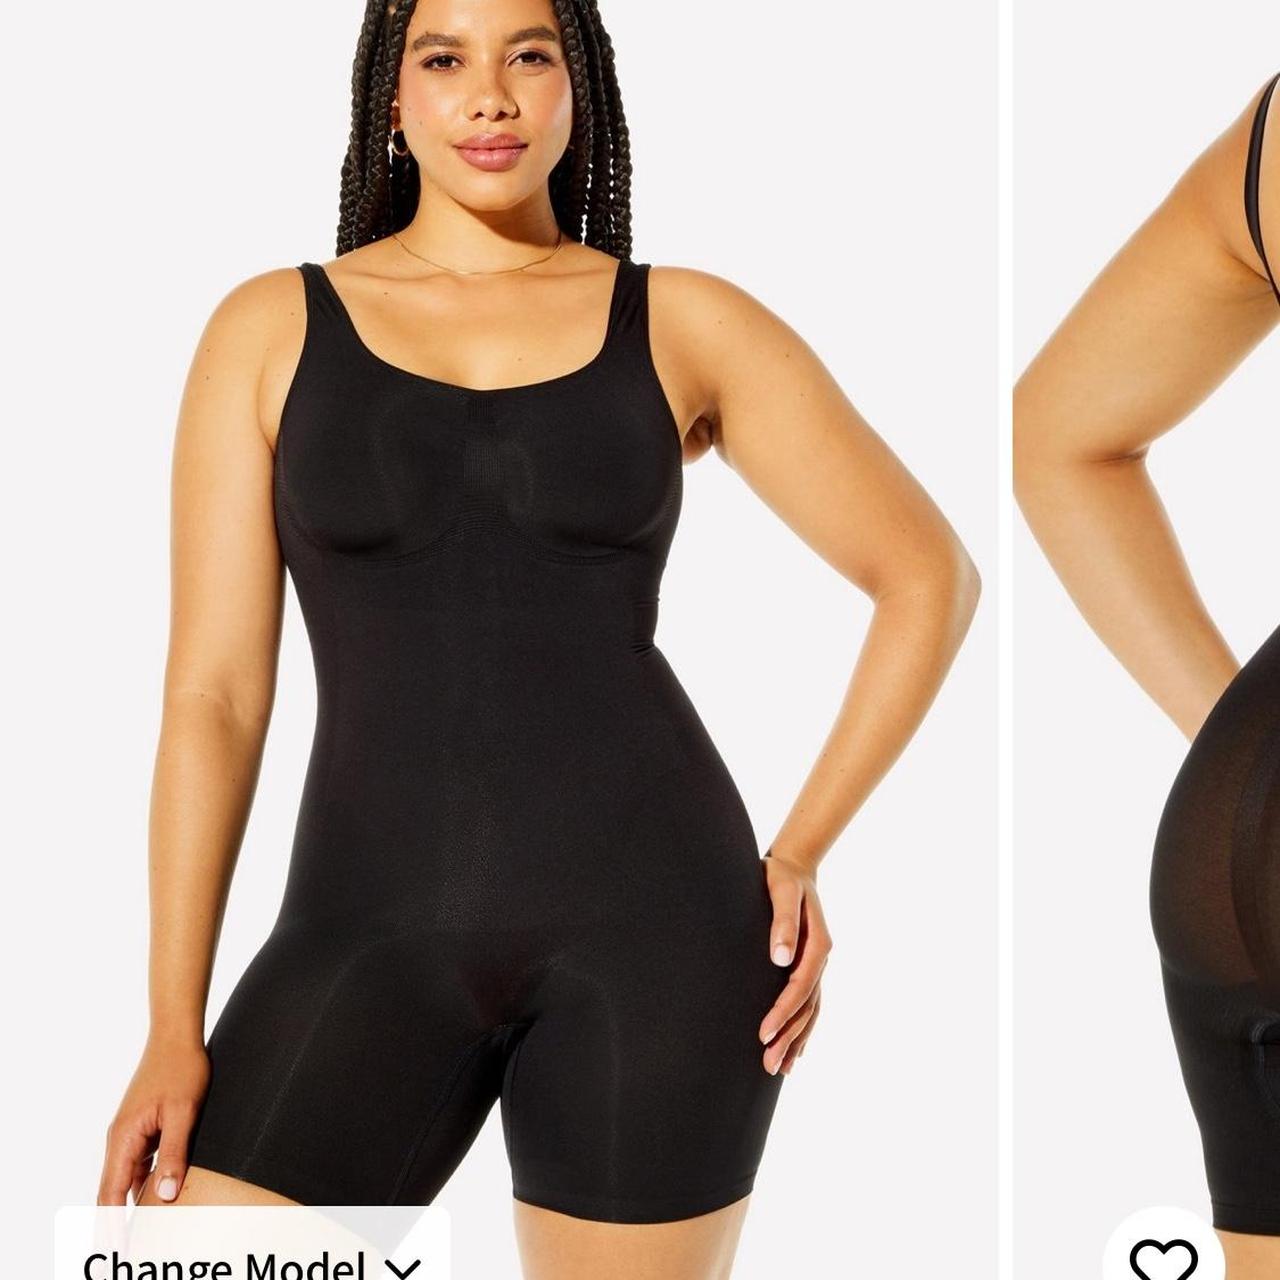 Yitty Fabletics nearly naked comprehensive shape - Depop